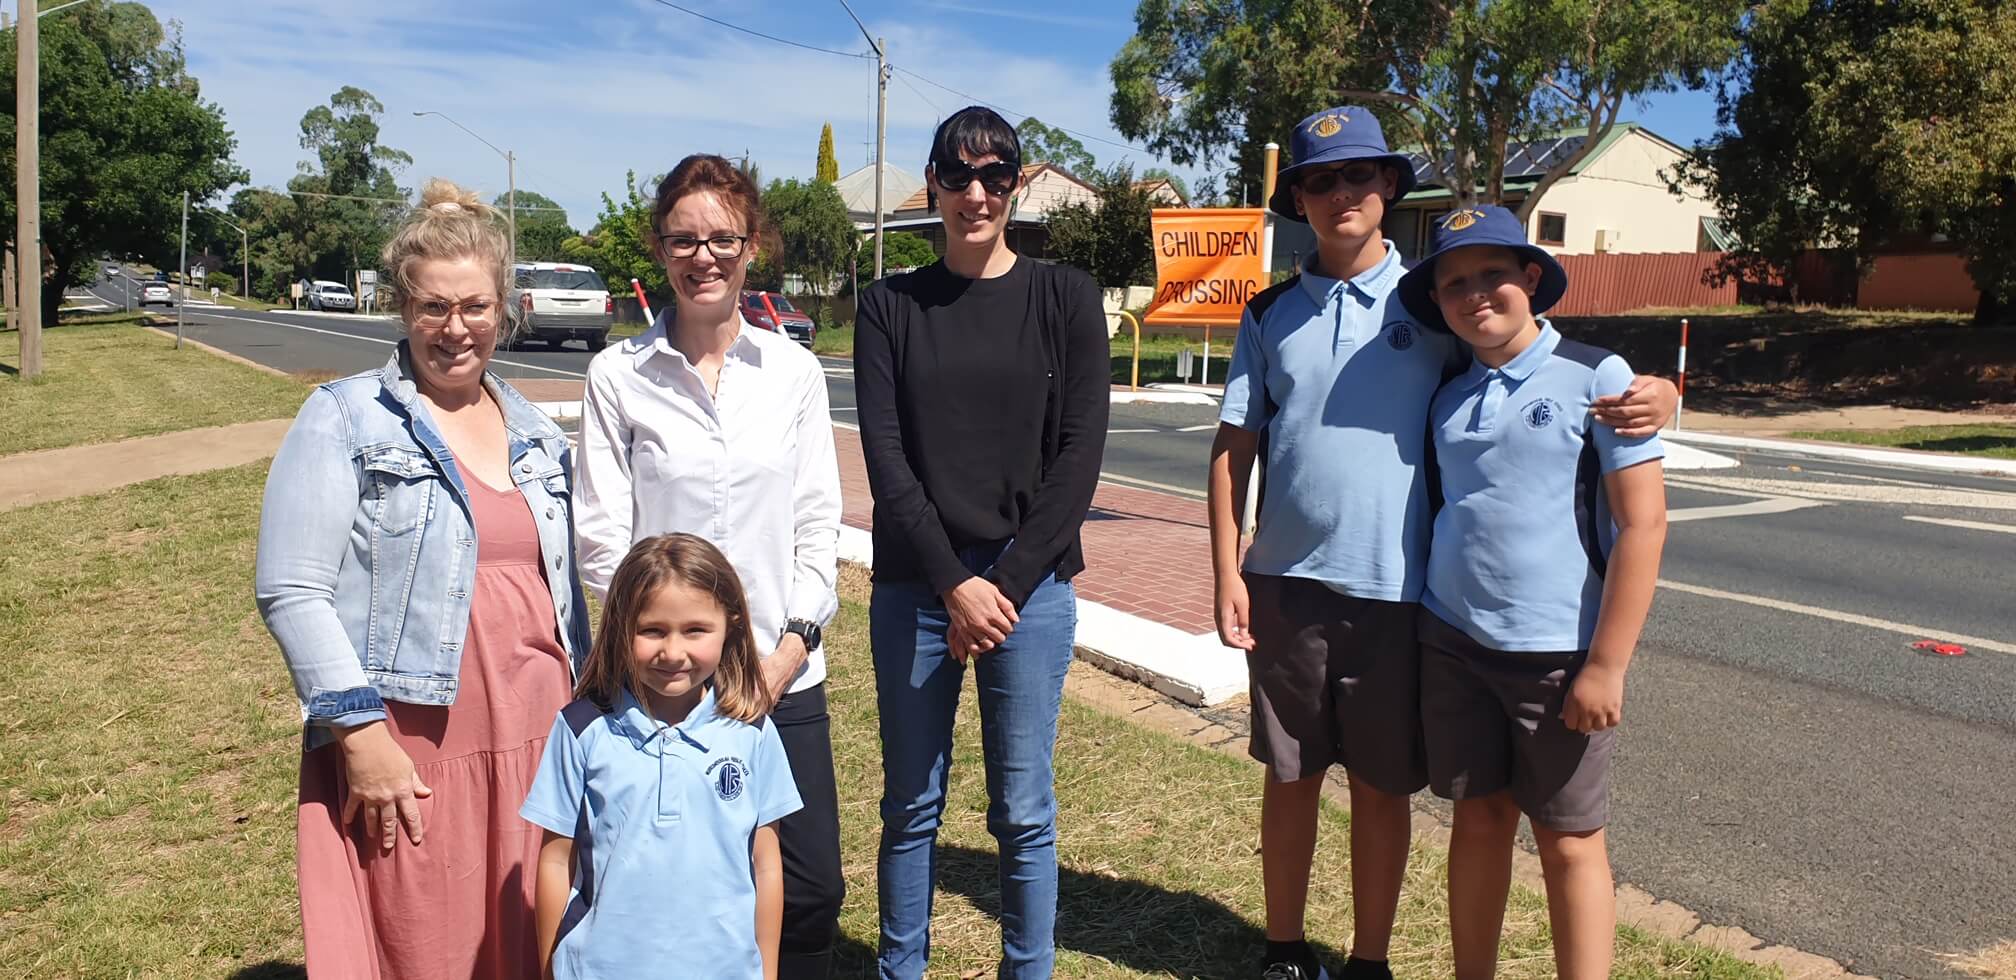 Renee Ford, Ana Djukic, Steph Cooke MP, Carrie Giddings, David and Marko Djukic stand in front of a school crossing.